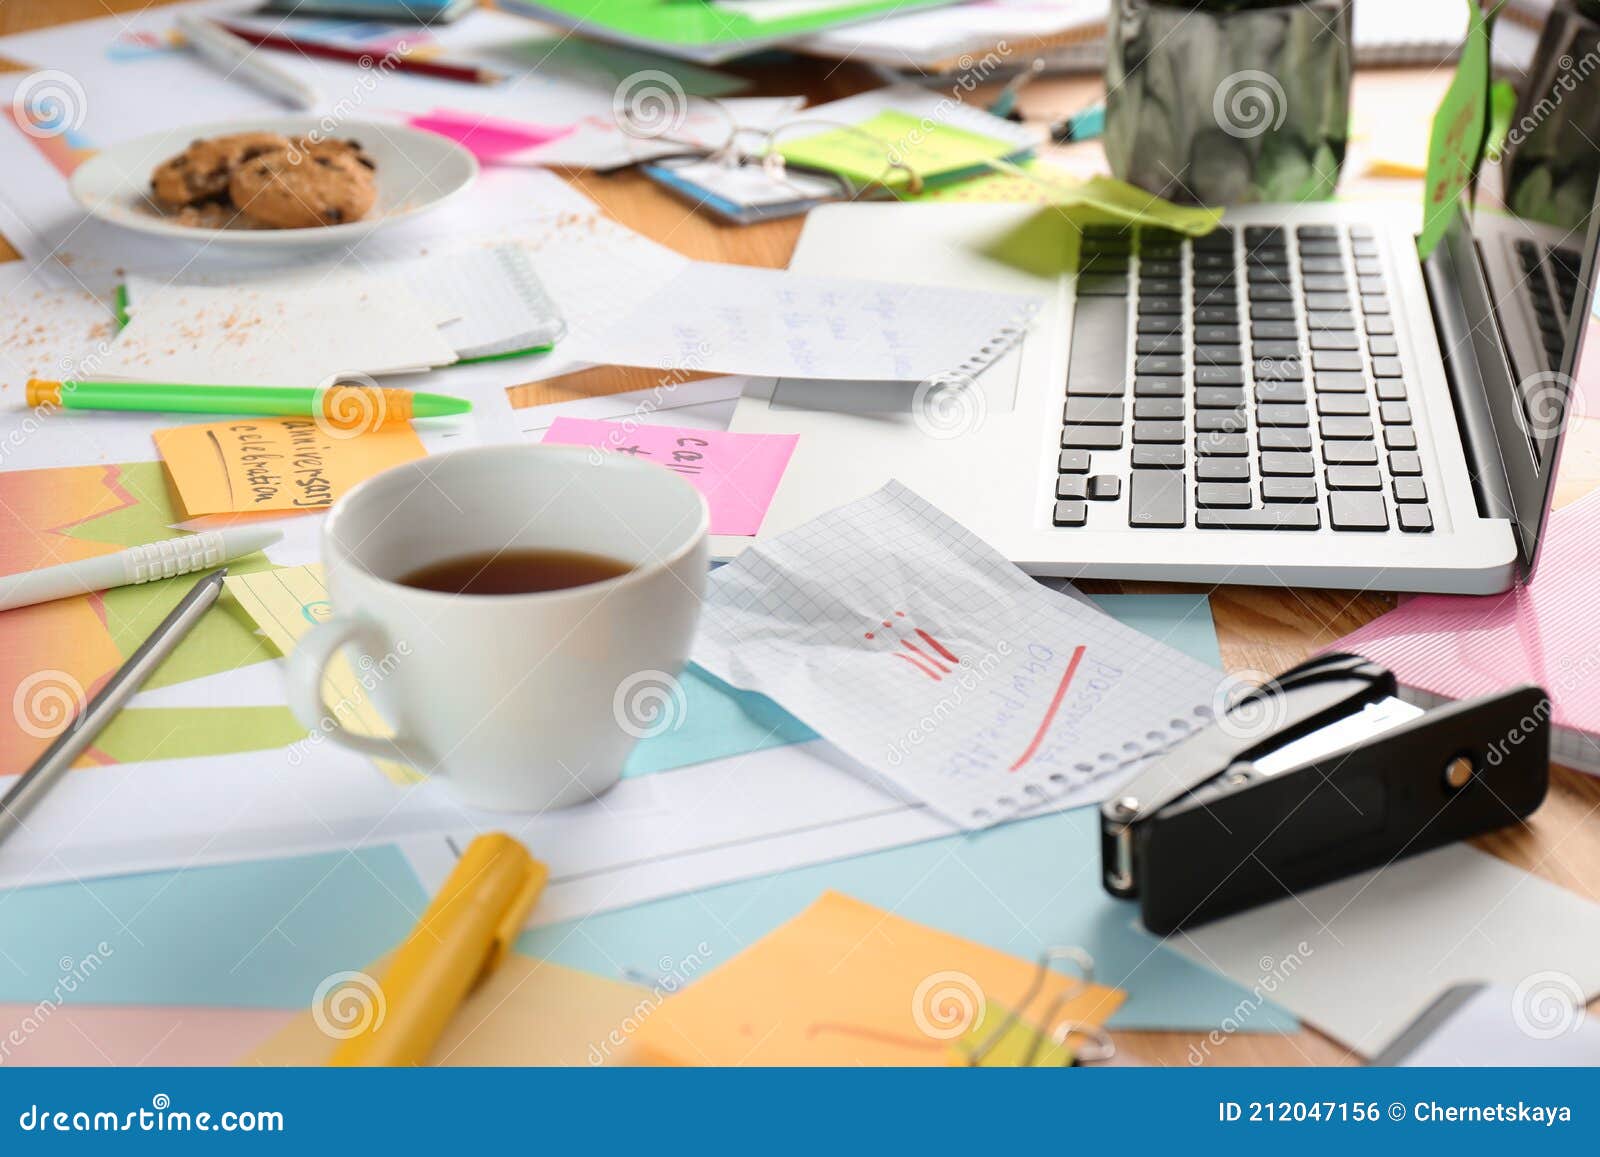 Office Desk with Laptop with Business Accessories and Cup of Tea